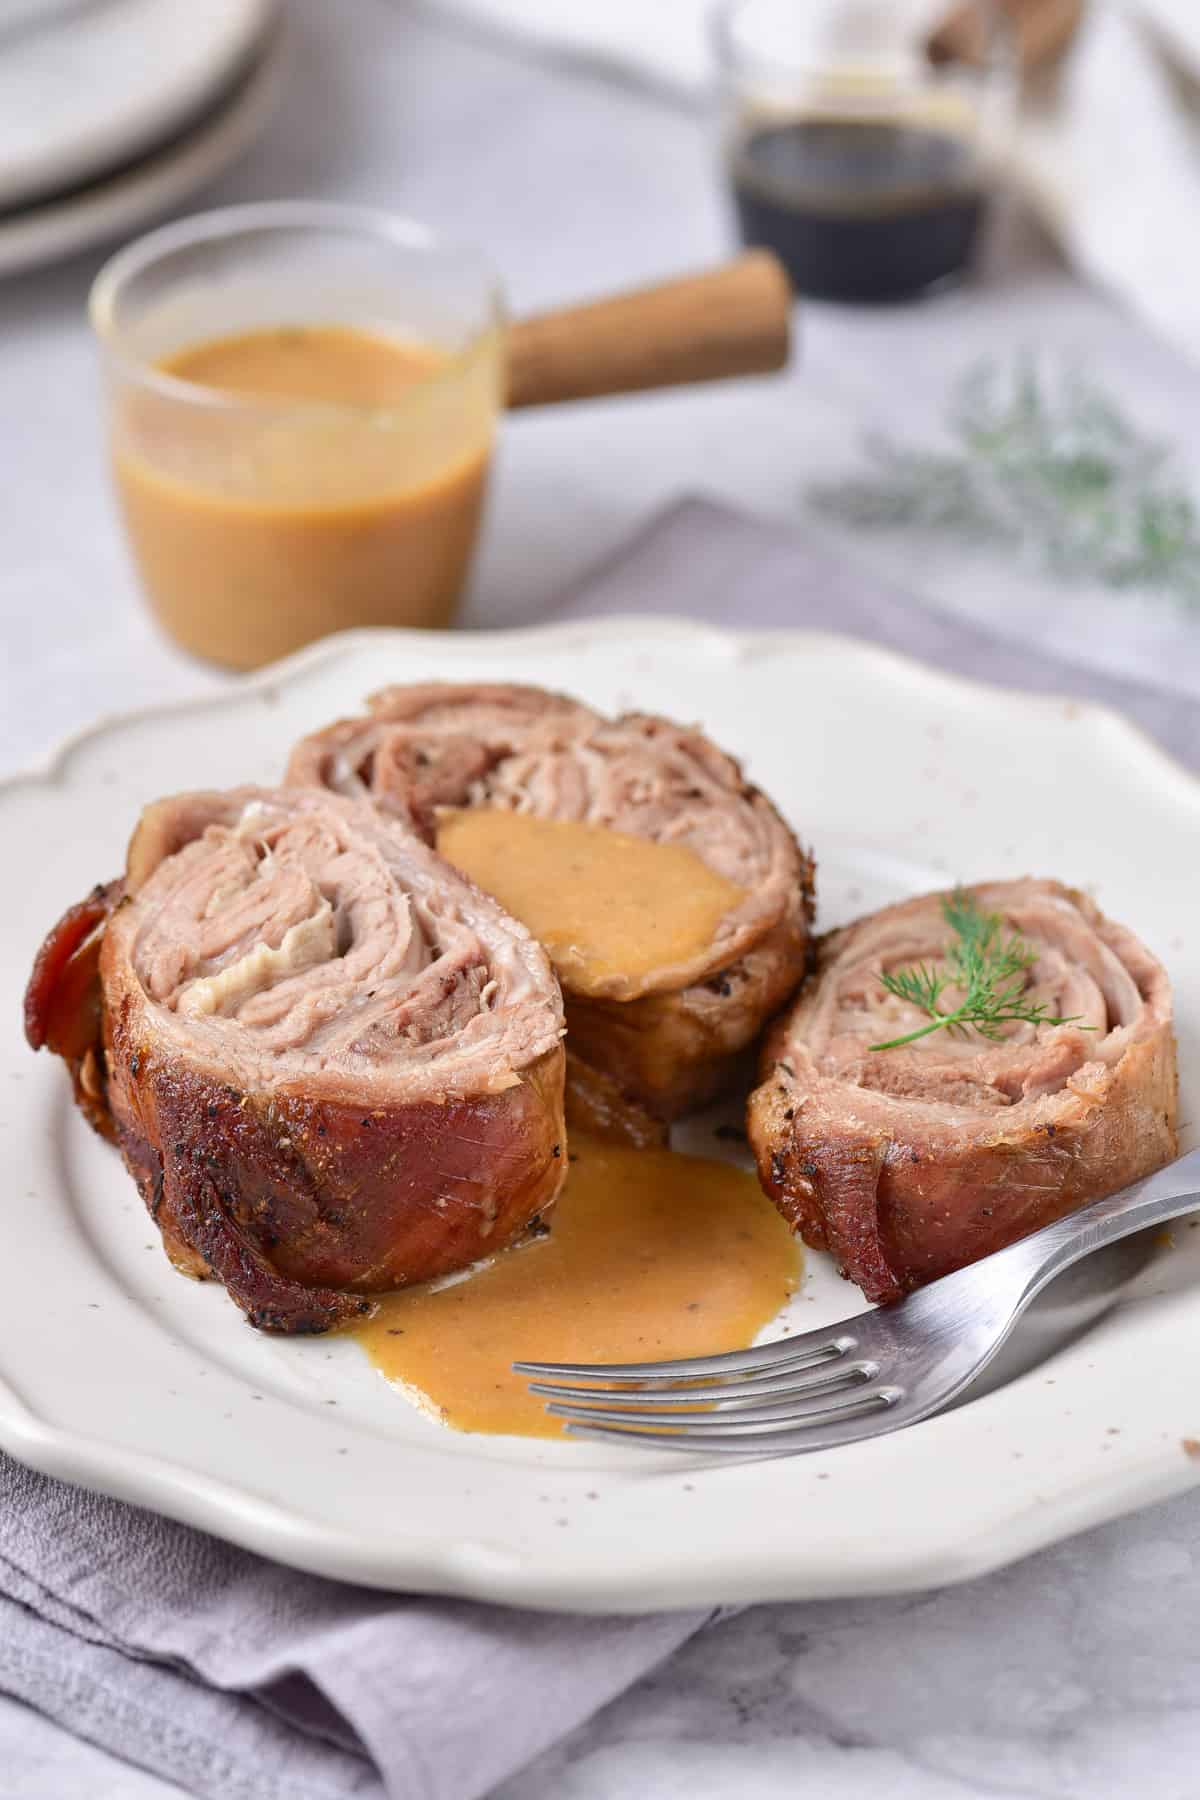 Table with a plate of rolled lamb breast slices, with a jug of gravy.